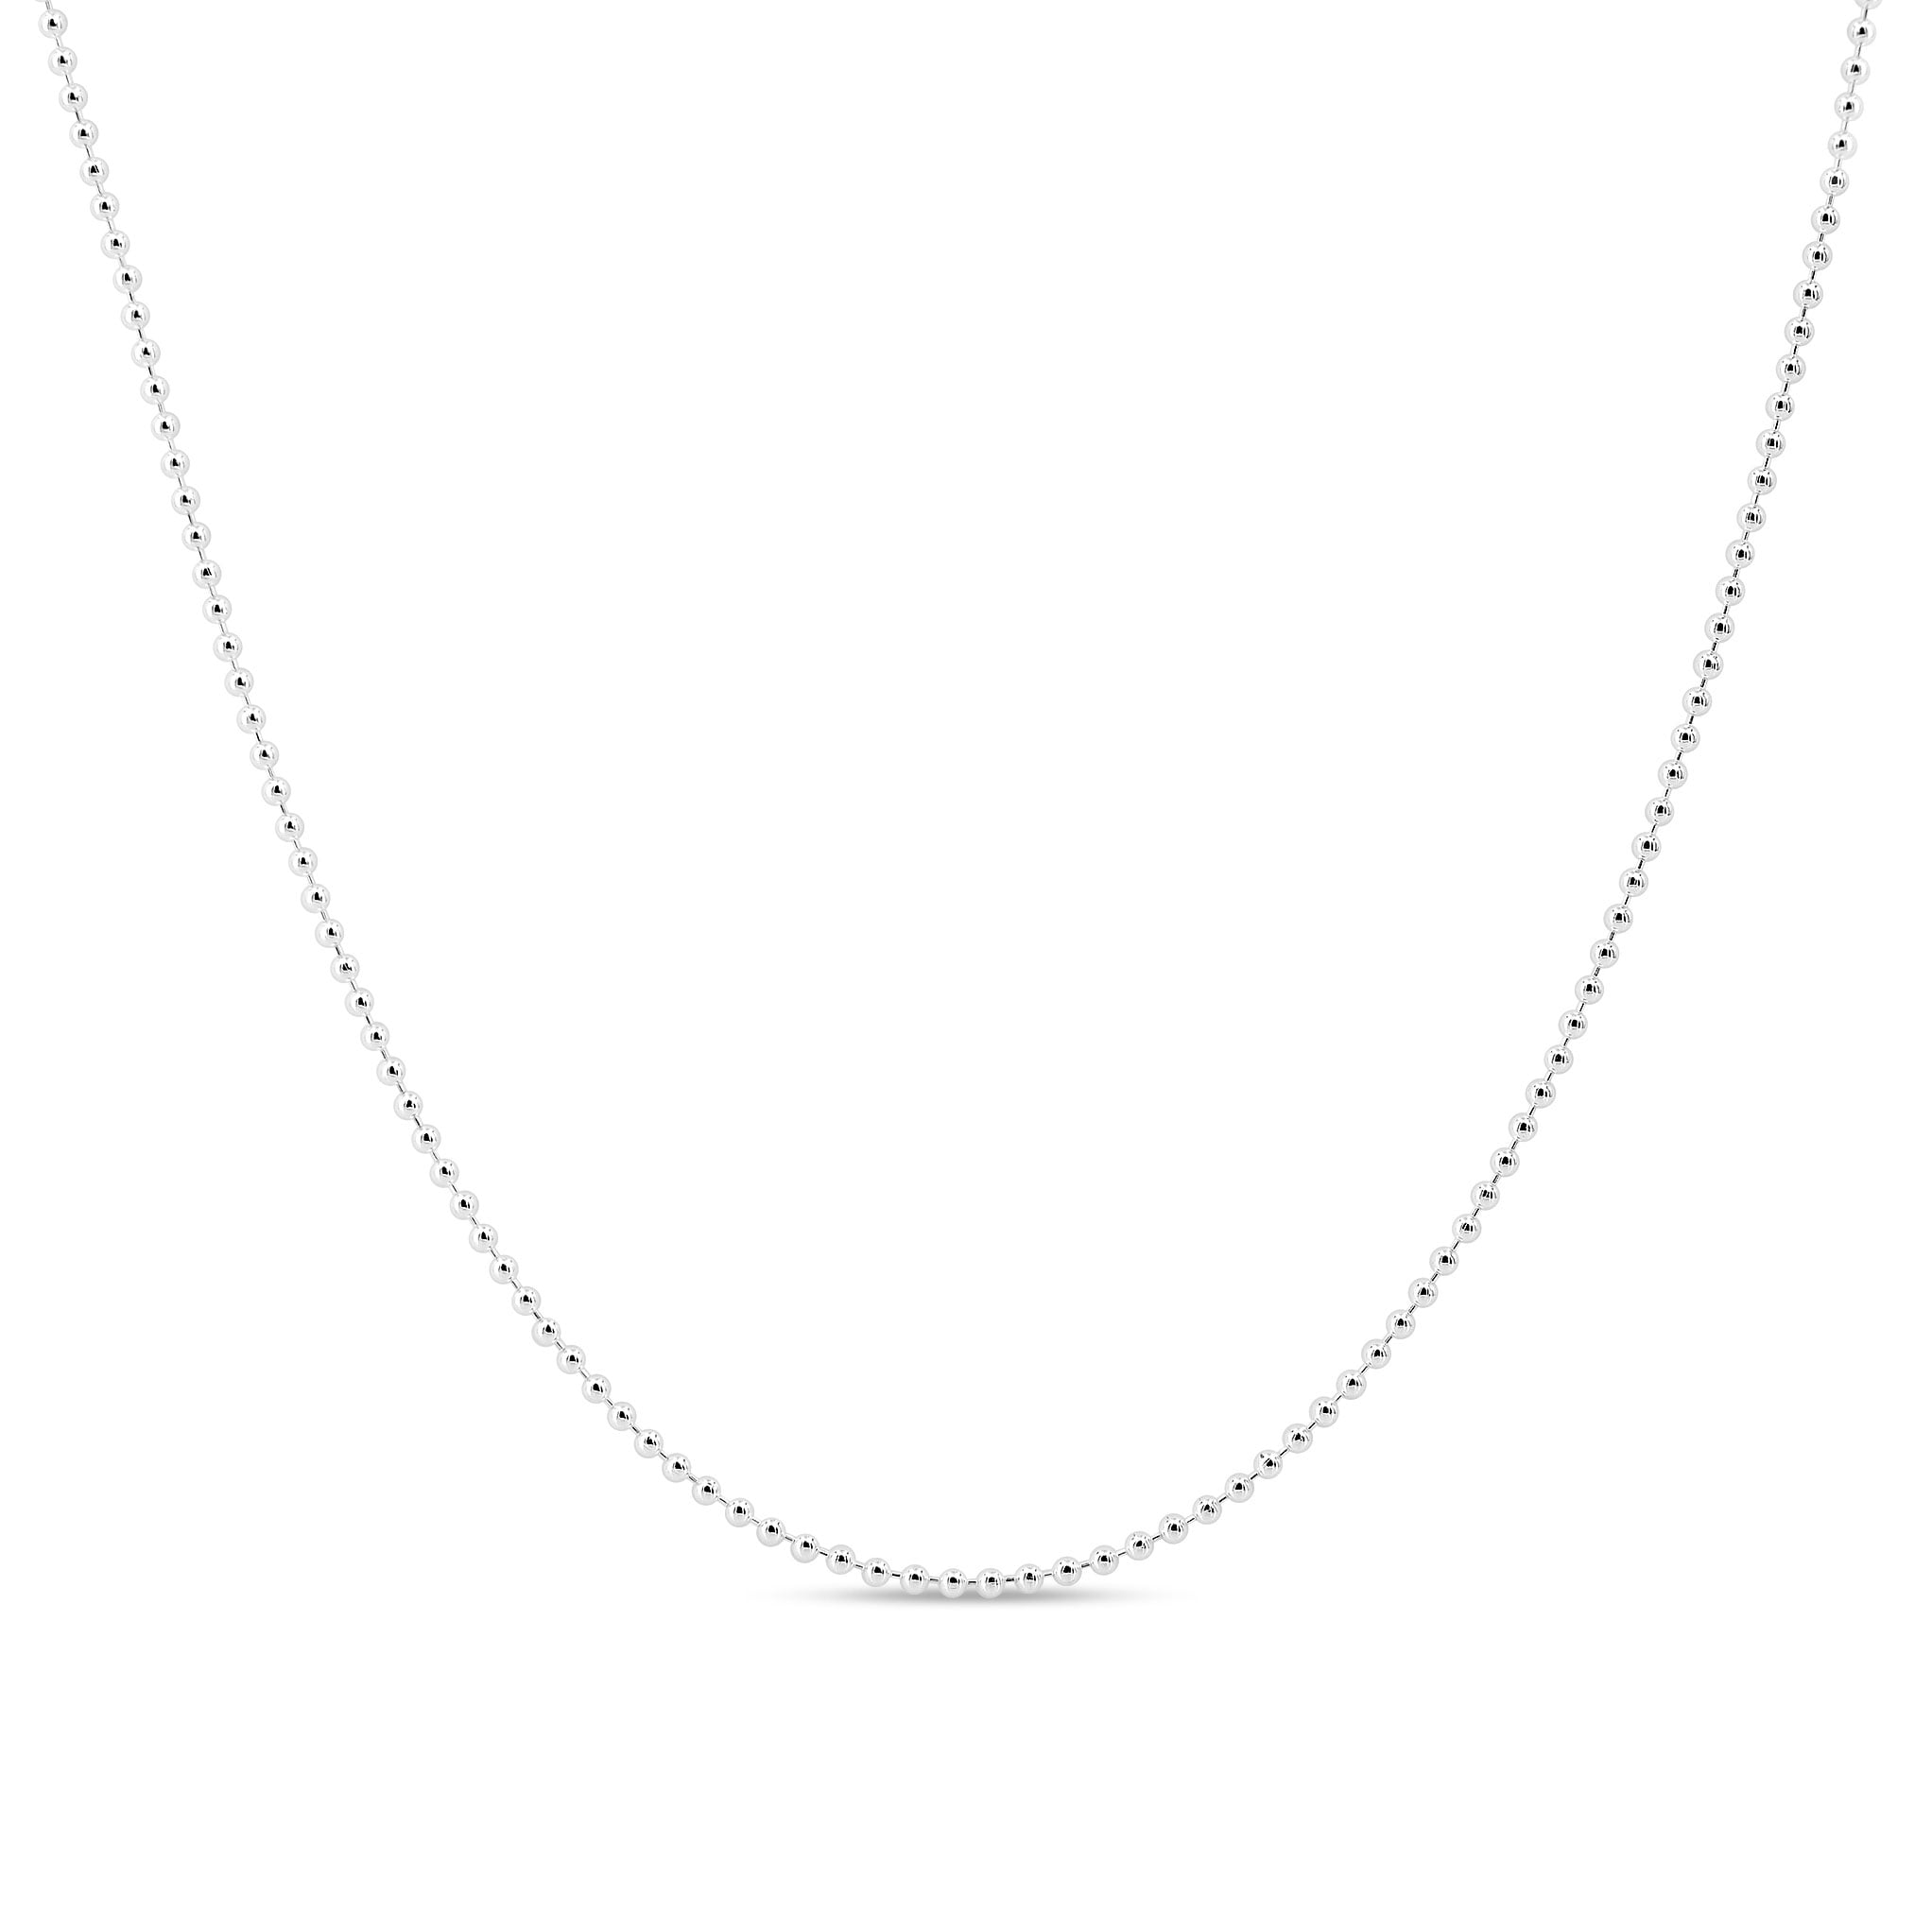 Snake or Ball Chain Necklace Sterling Silver Small Lengthened Polished Number 77 on a Sterling Silver Cable 